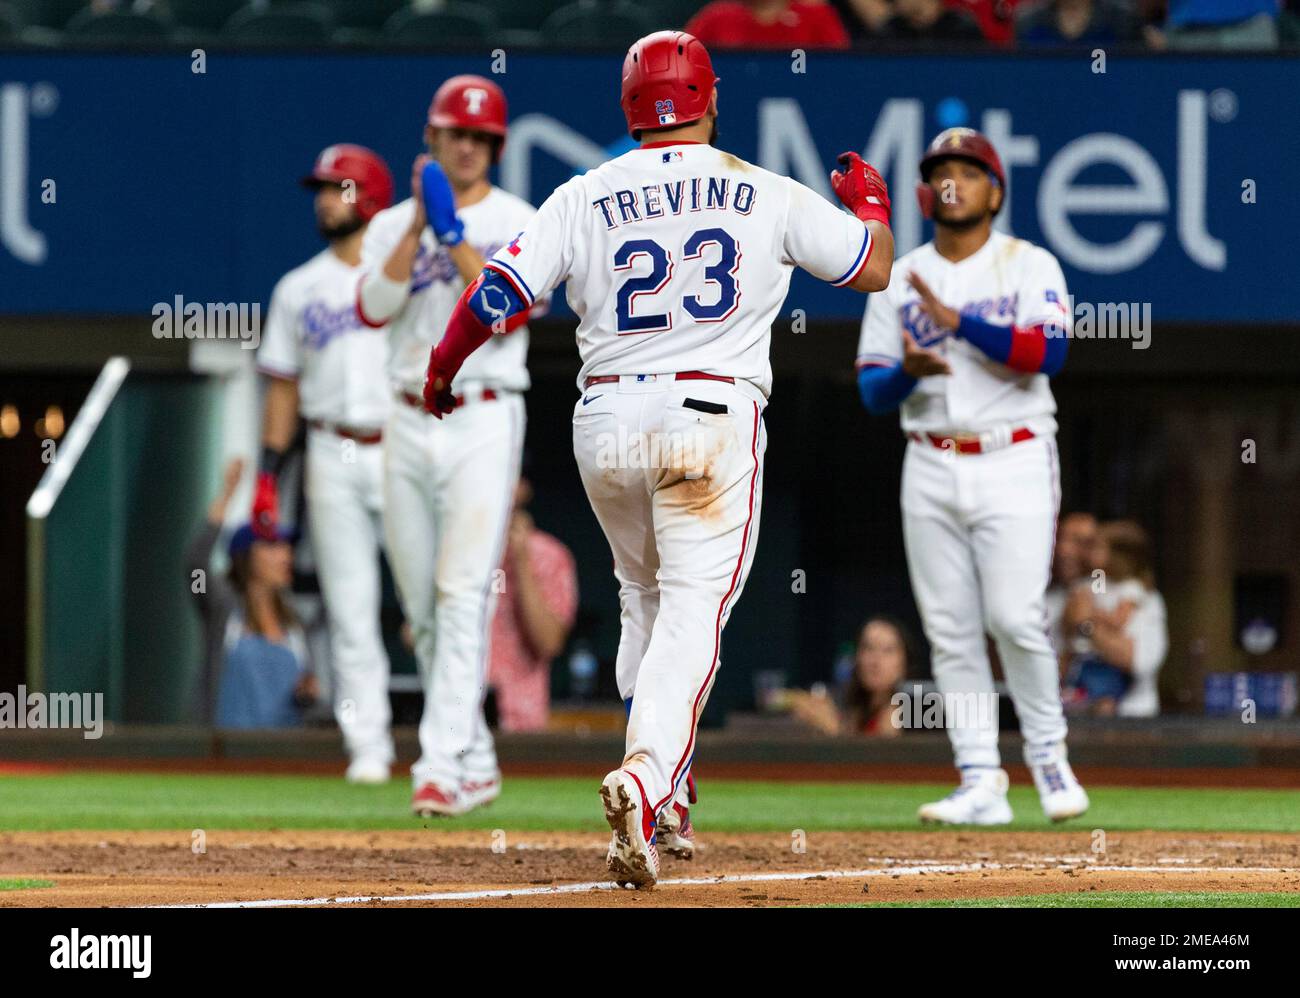 Texas Rangers' Jose Trevino (23) runs toward home plate after hitting a  home run during the sixth inning of a baseball game against the Oakland  Athletics, Monday, June 21, 2021, in Arlington